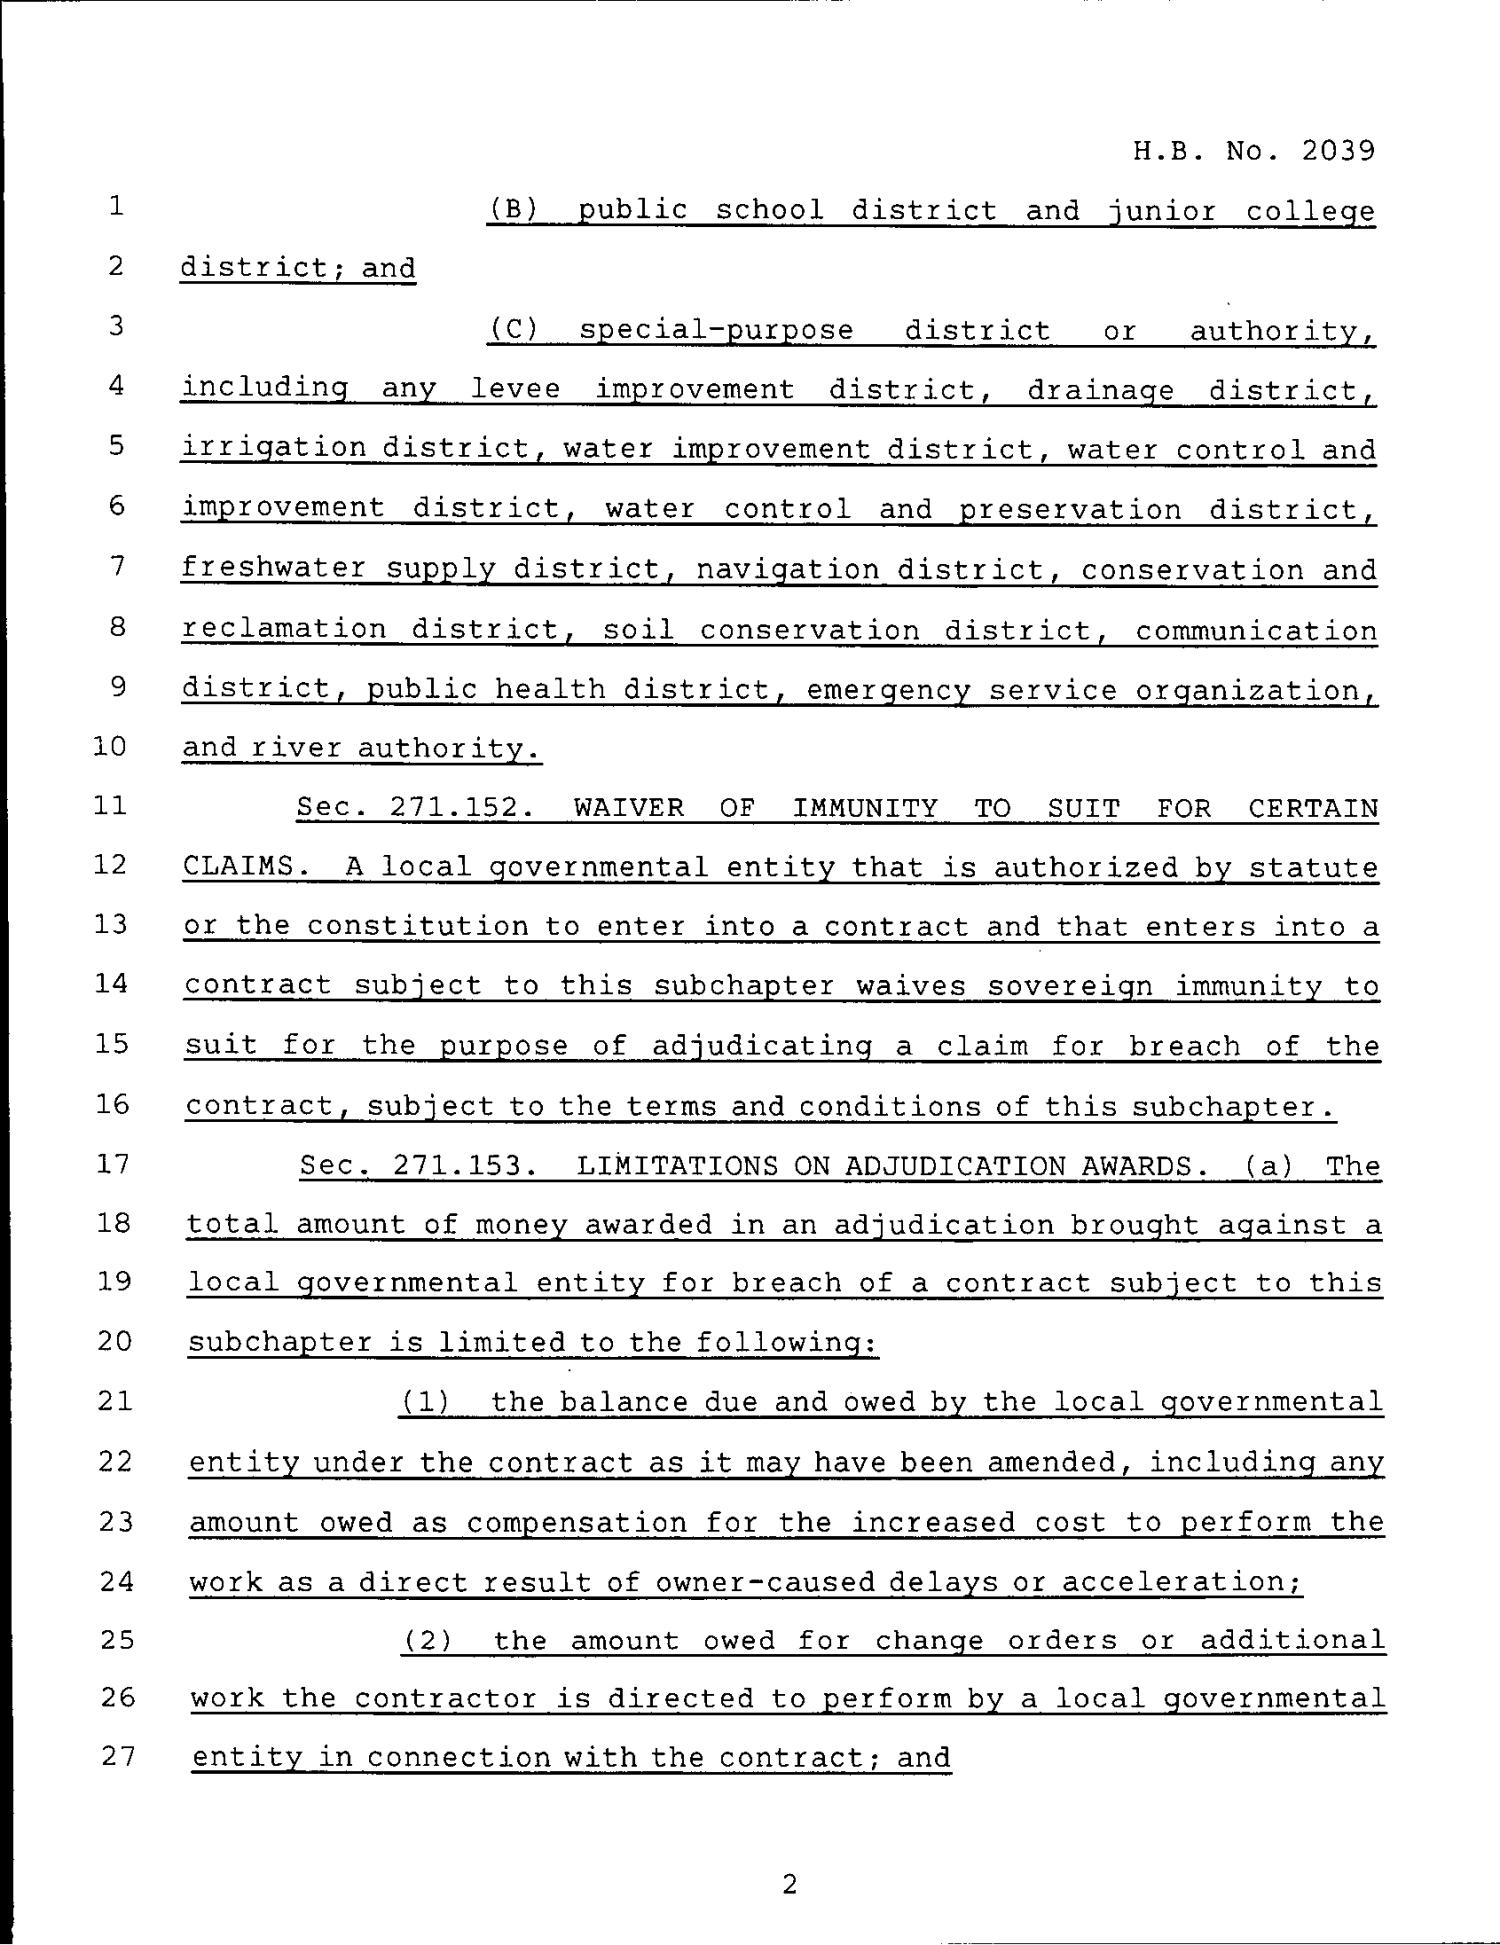 79th Texas Legislature, Regular Session, House Bill 2039, Chapter 604
                                                
                                                    [Sequence #]: 2 of 5
                                                